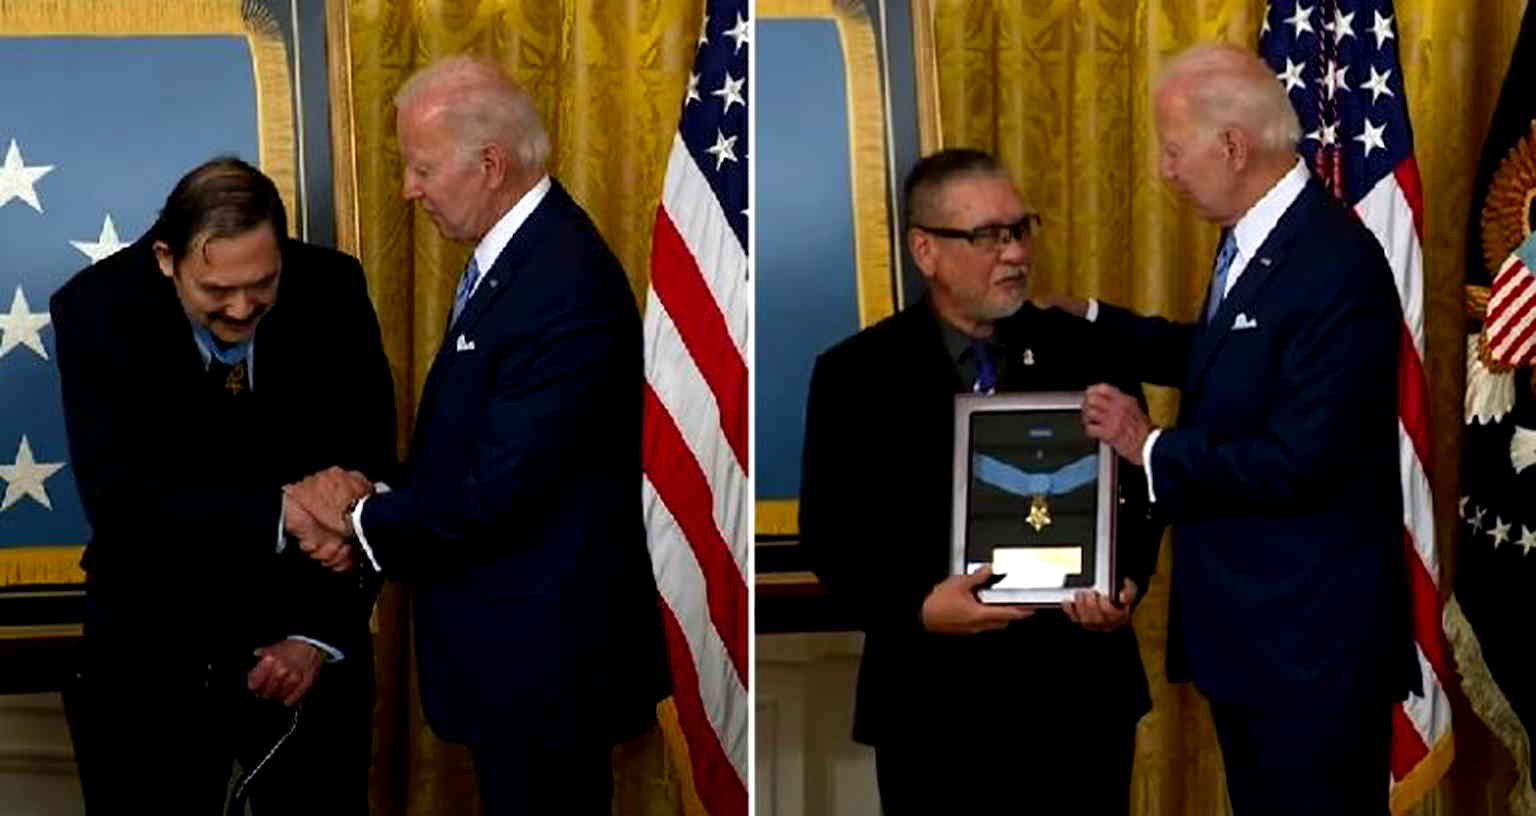 Biden awards Medal of Honor to previously overlooked Vietnam War vets, including two Asian Americans